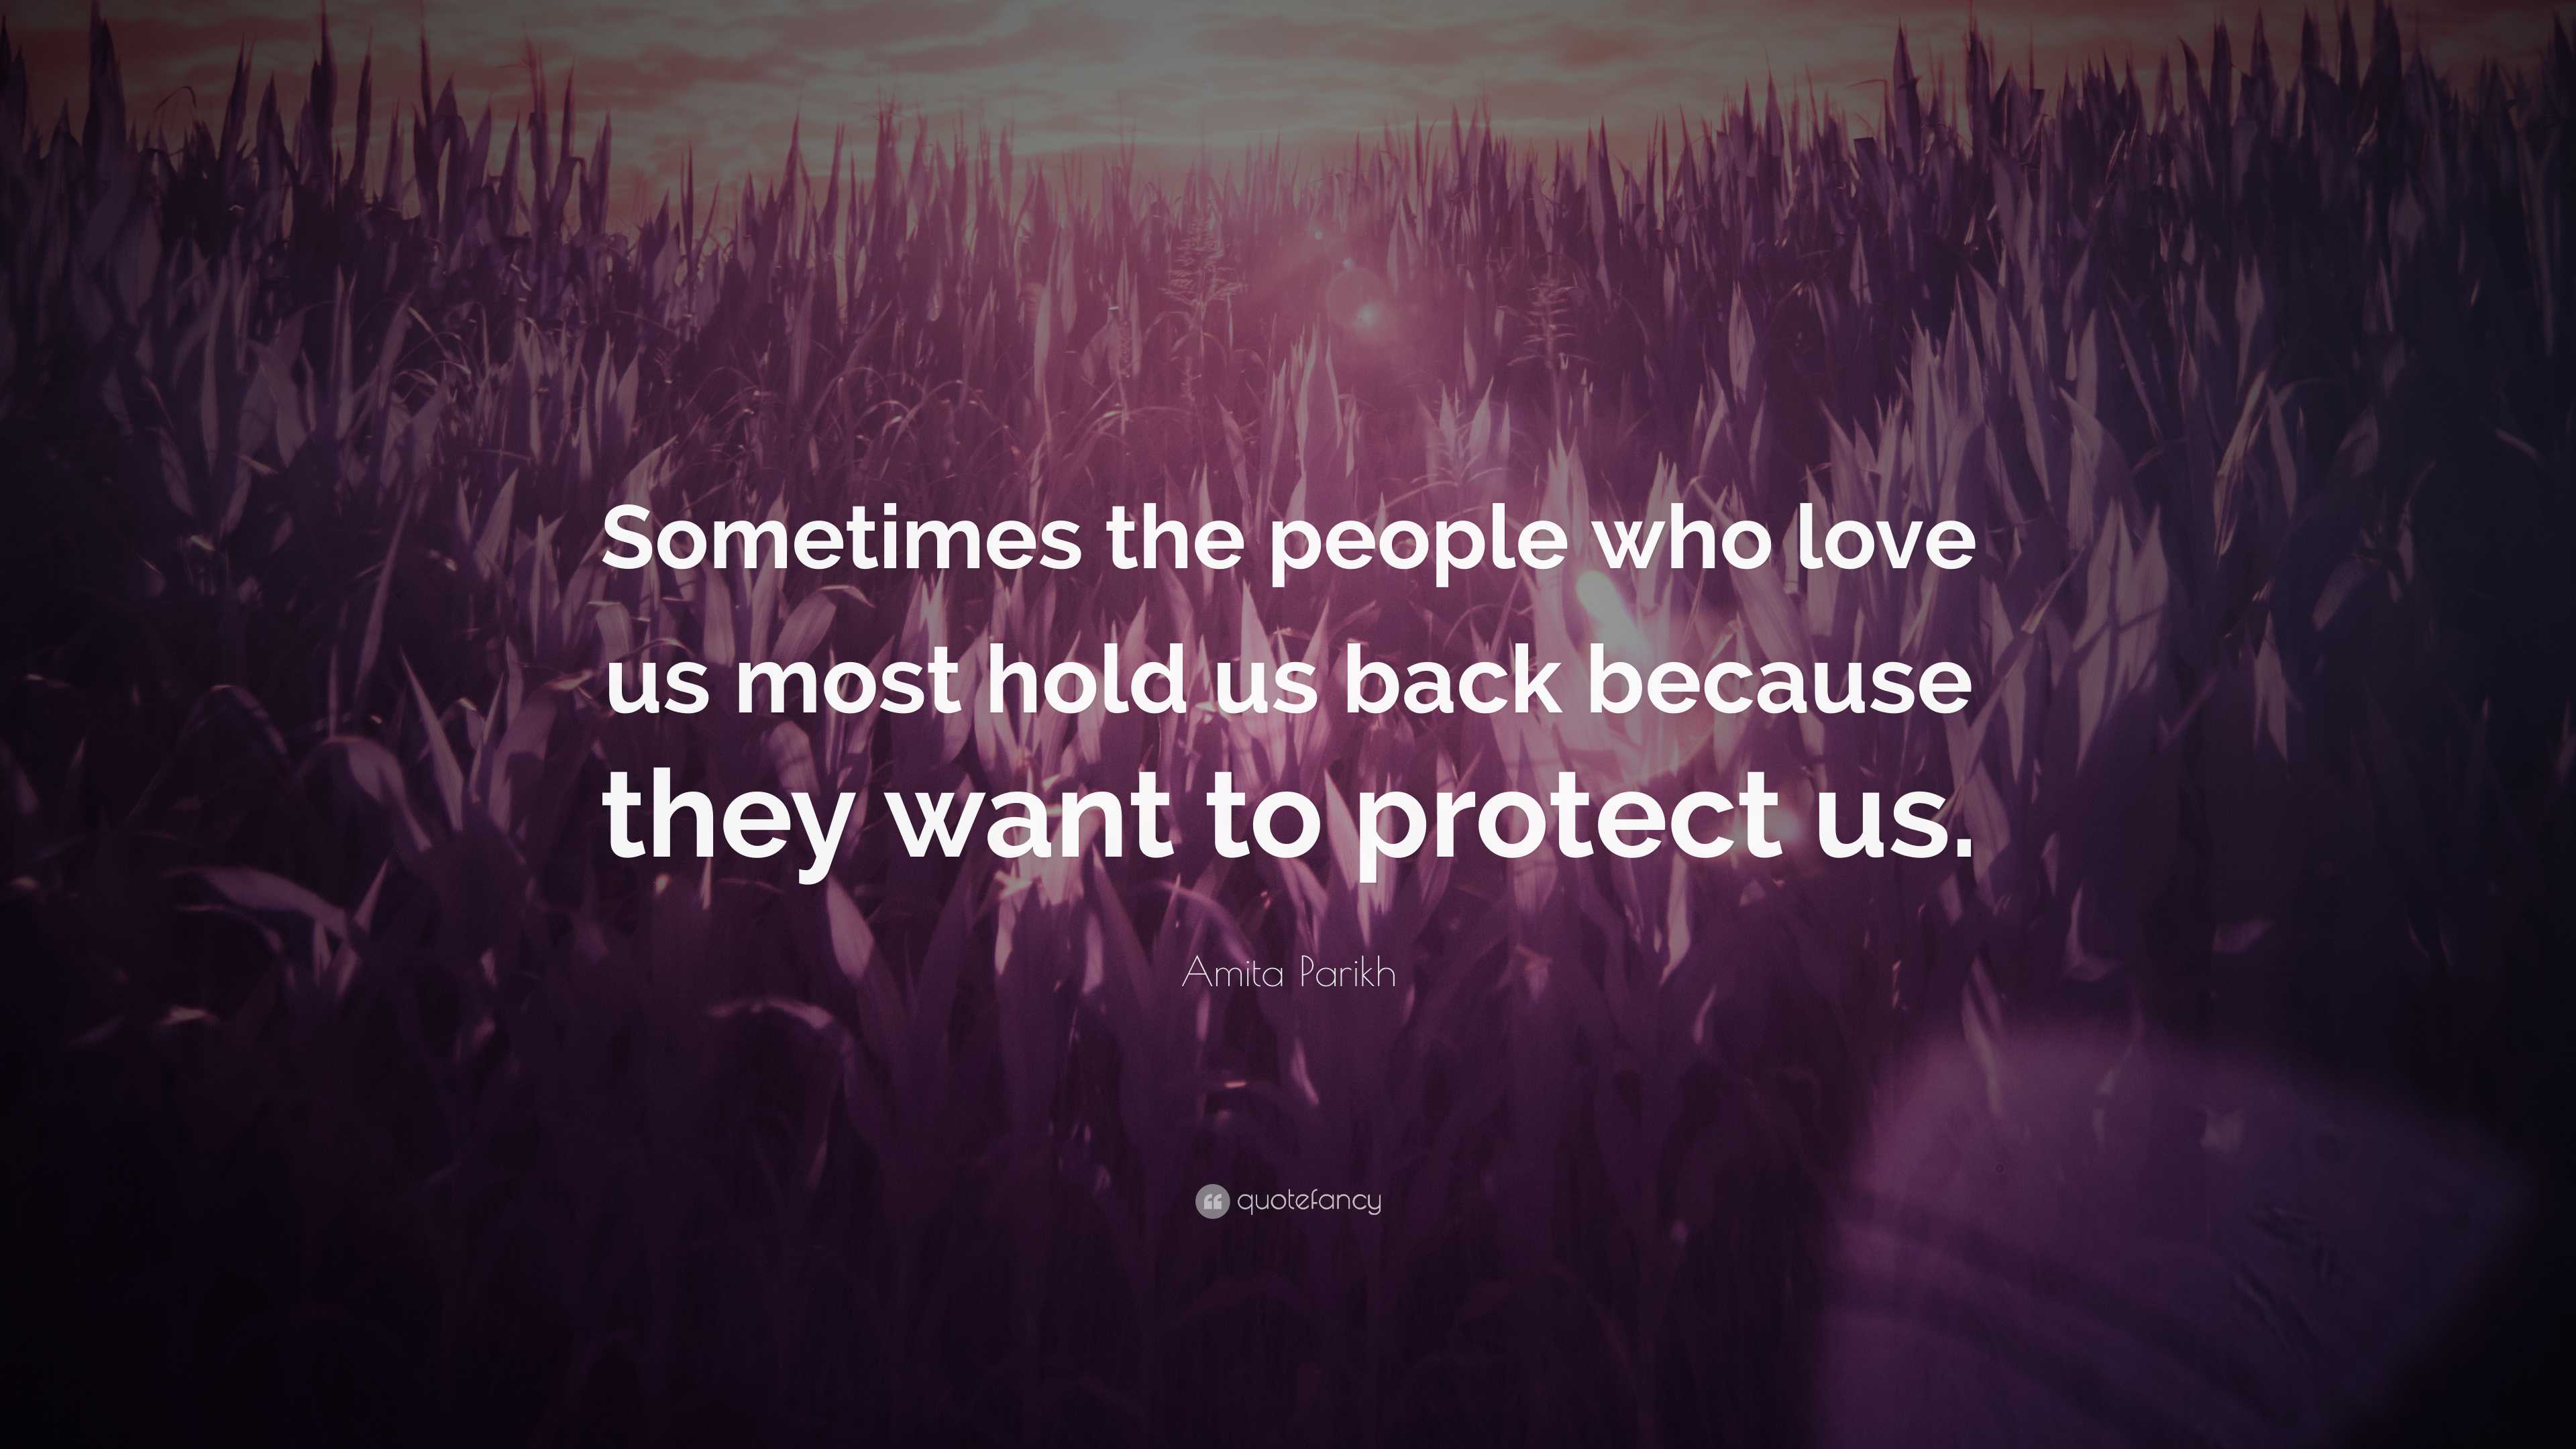 Amita Parikh Quote: “Sometimes the people who love us most hold us back ...